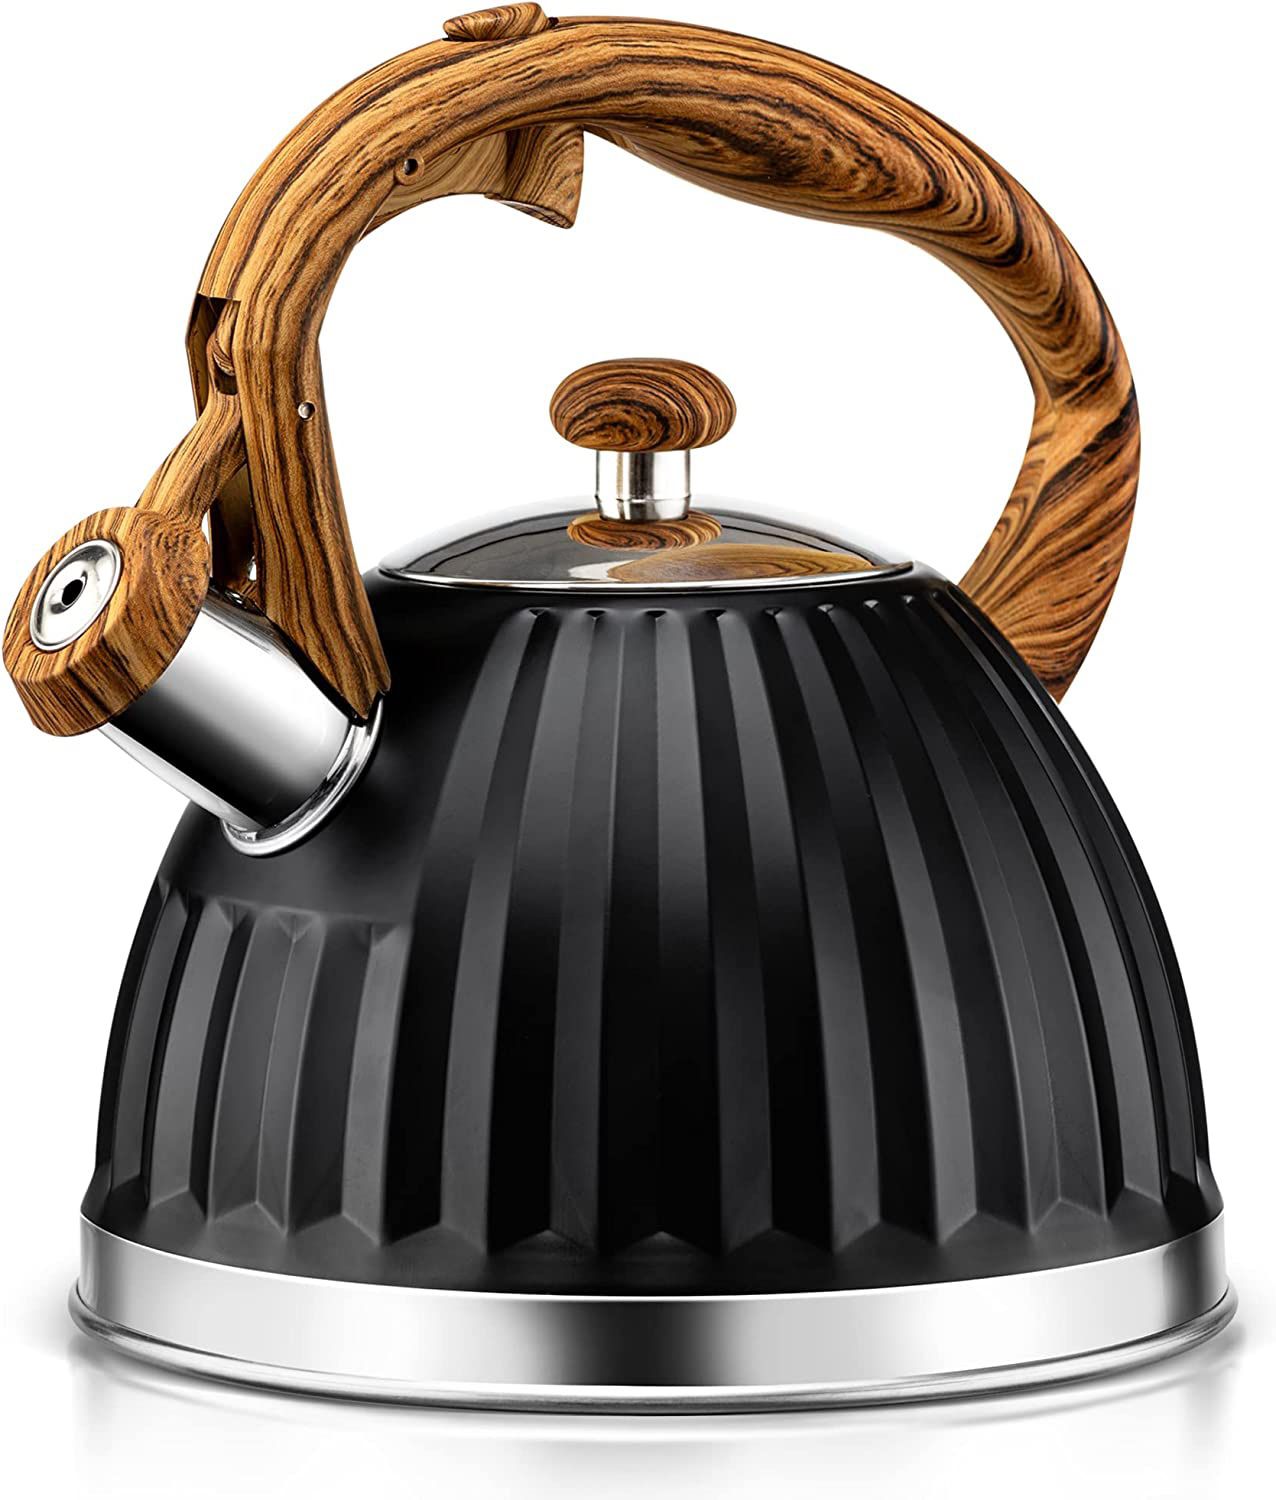 Tea Kettle With Real Wood Handle 